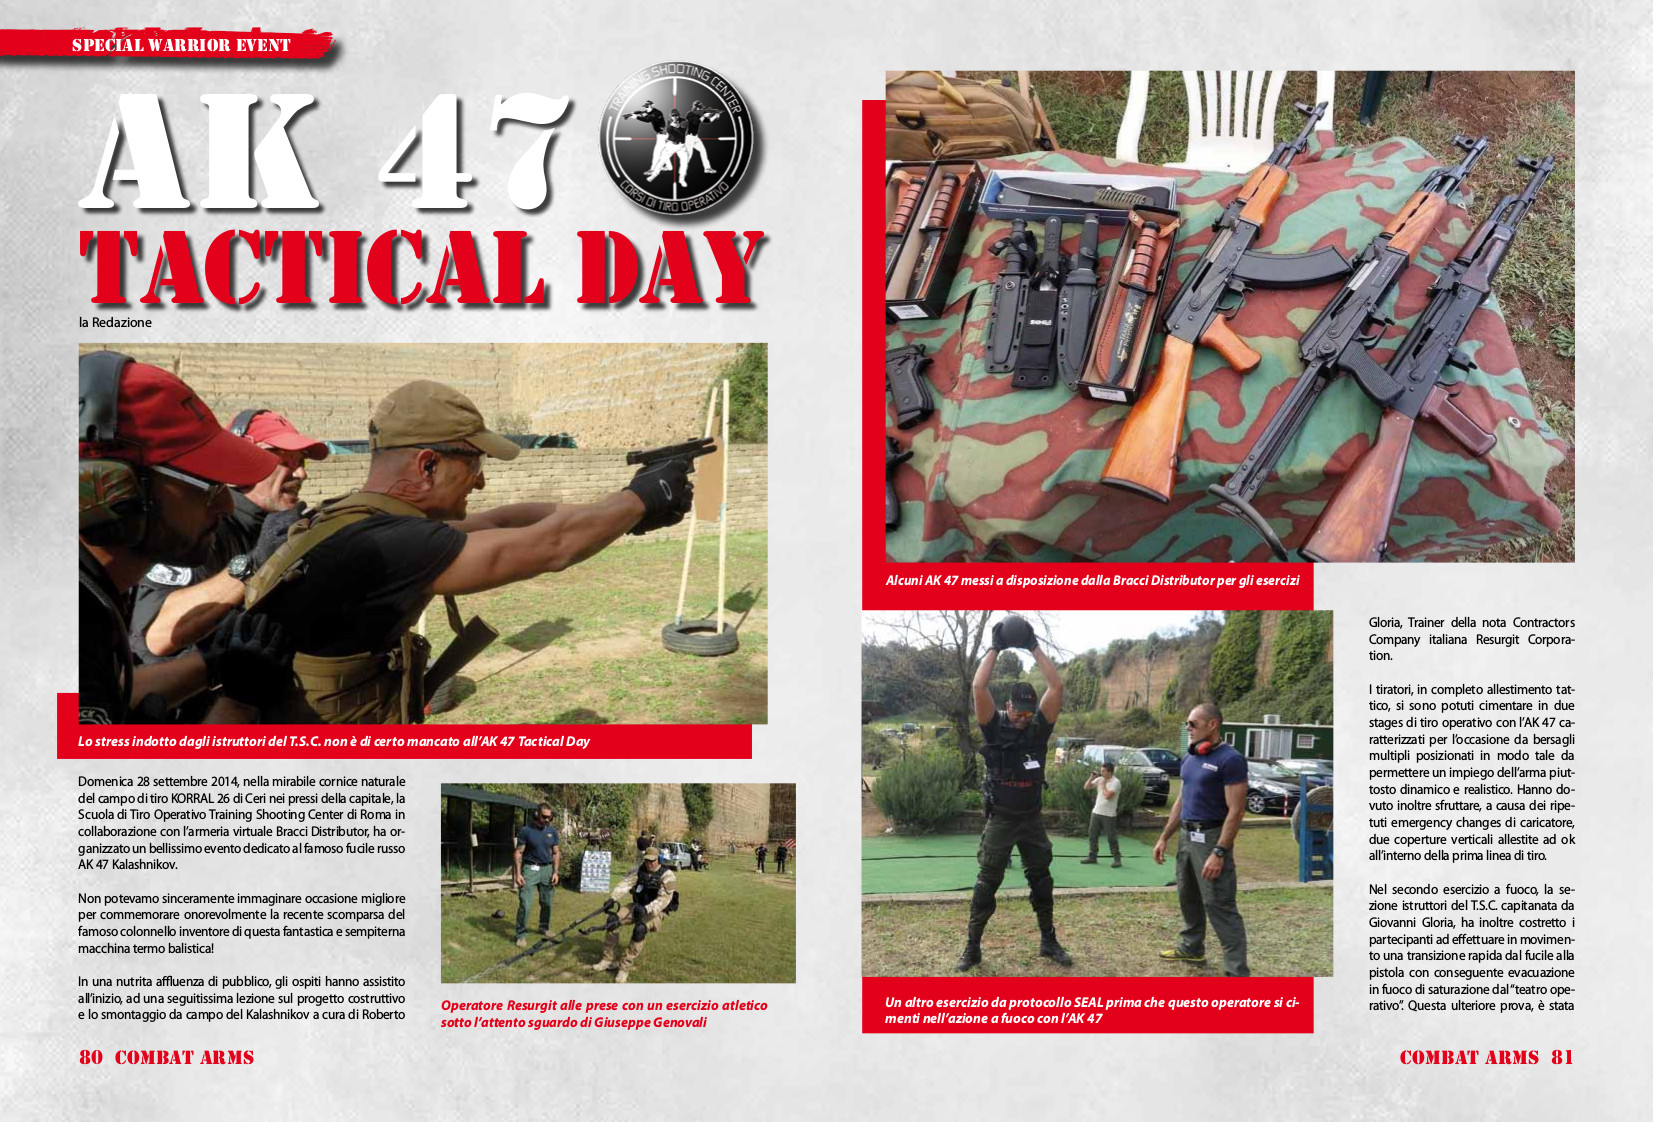 AK 47 TACTICAL DAY 2014